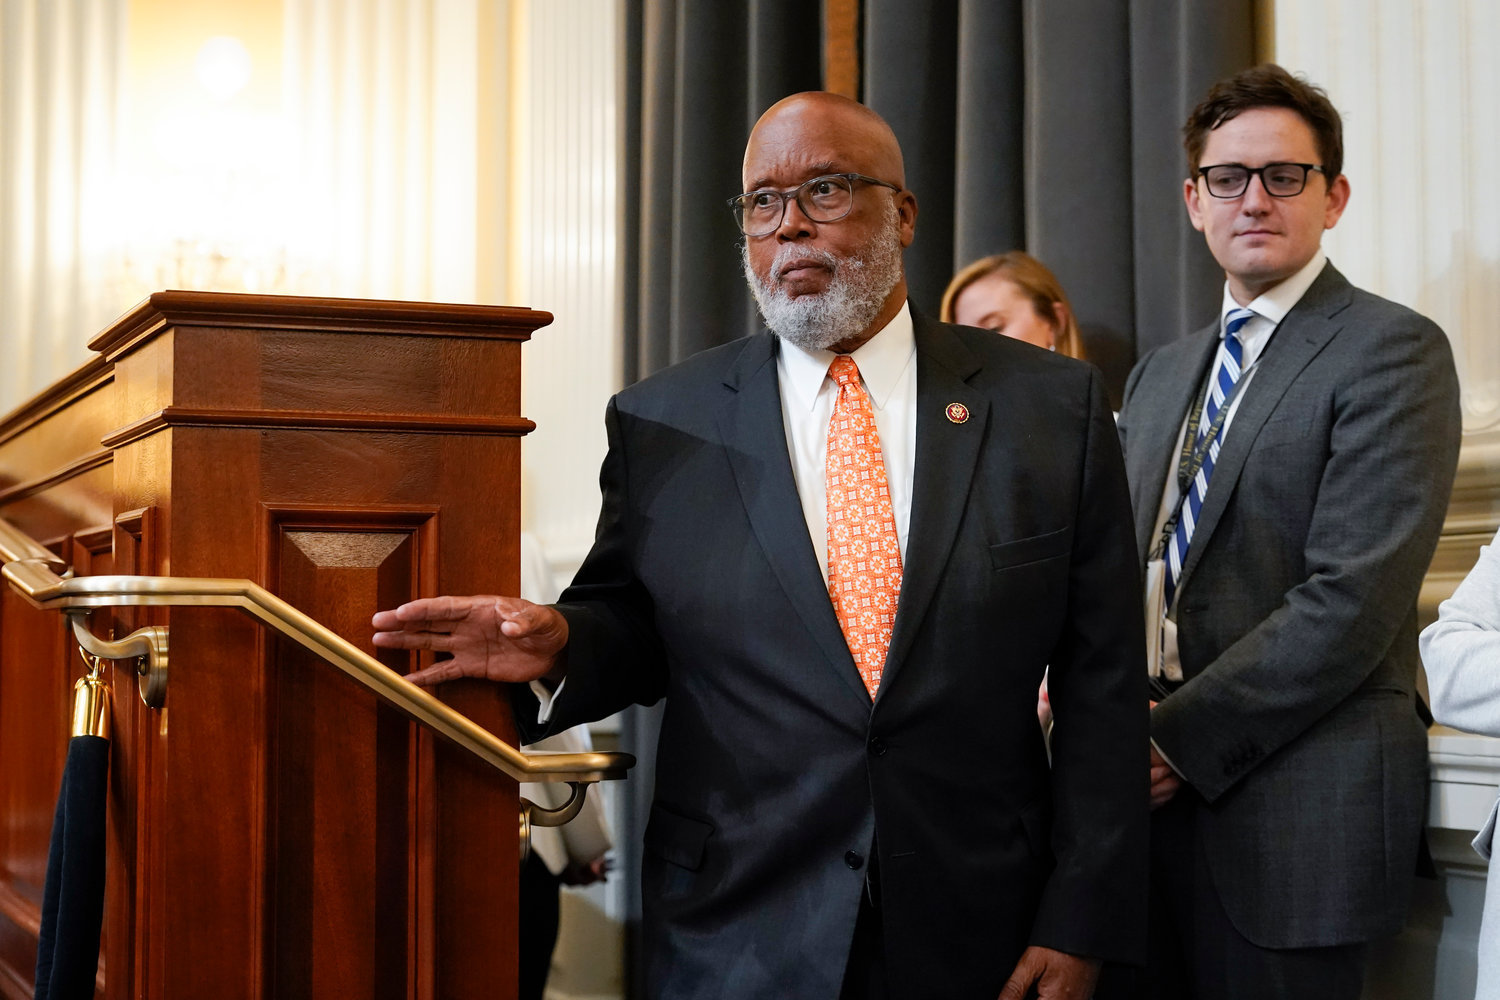 Chairman Bennie Thompson, D-Miss., arrives as the House select committee investigating the Jan. 6 attack on the U.S. Capitol continues to reveal its findings of a year-long investigation, at the Capitol in Washington, Thursday, June 23, 2022. (AP Photo/J. Scott Applewhite)